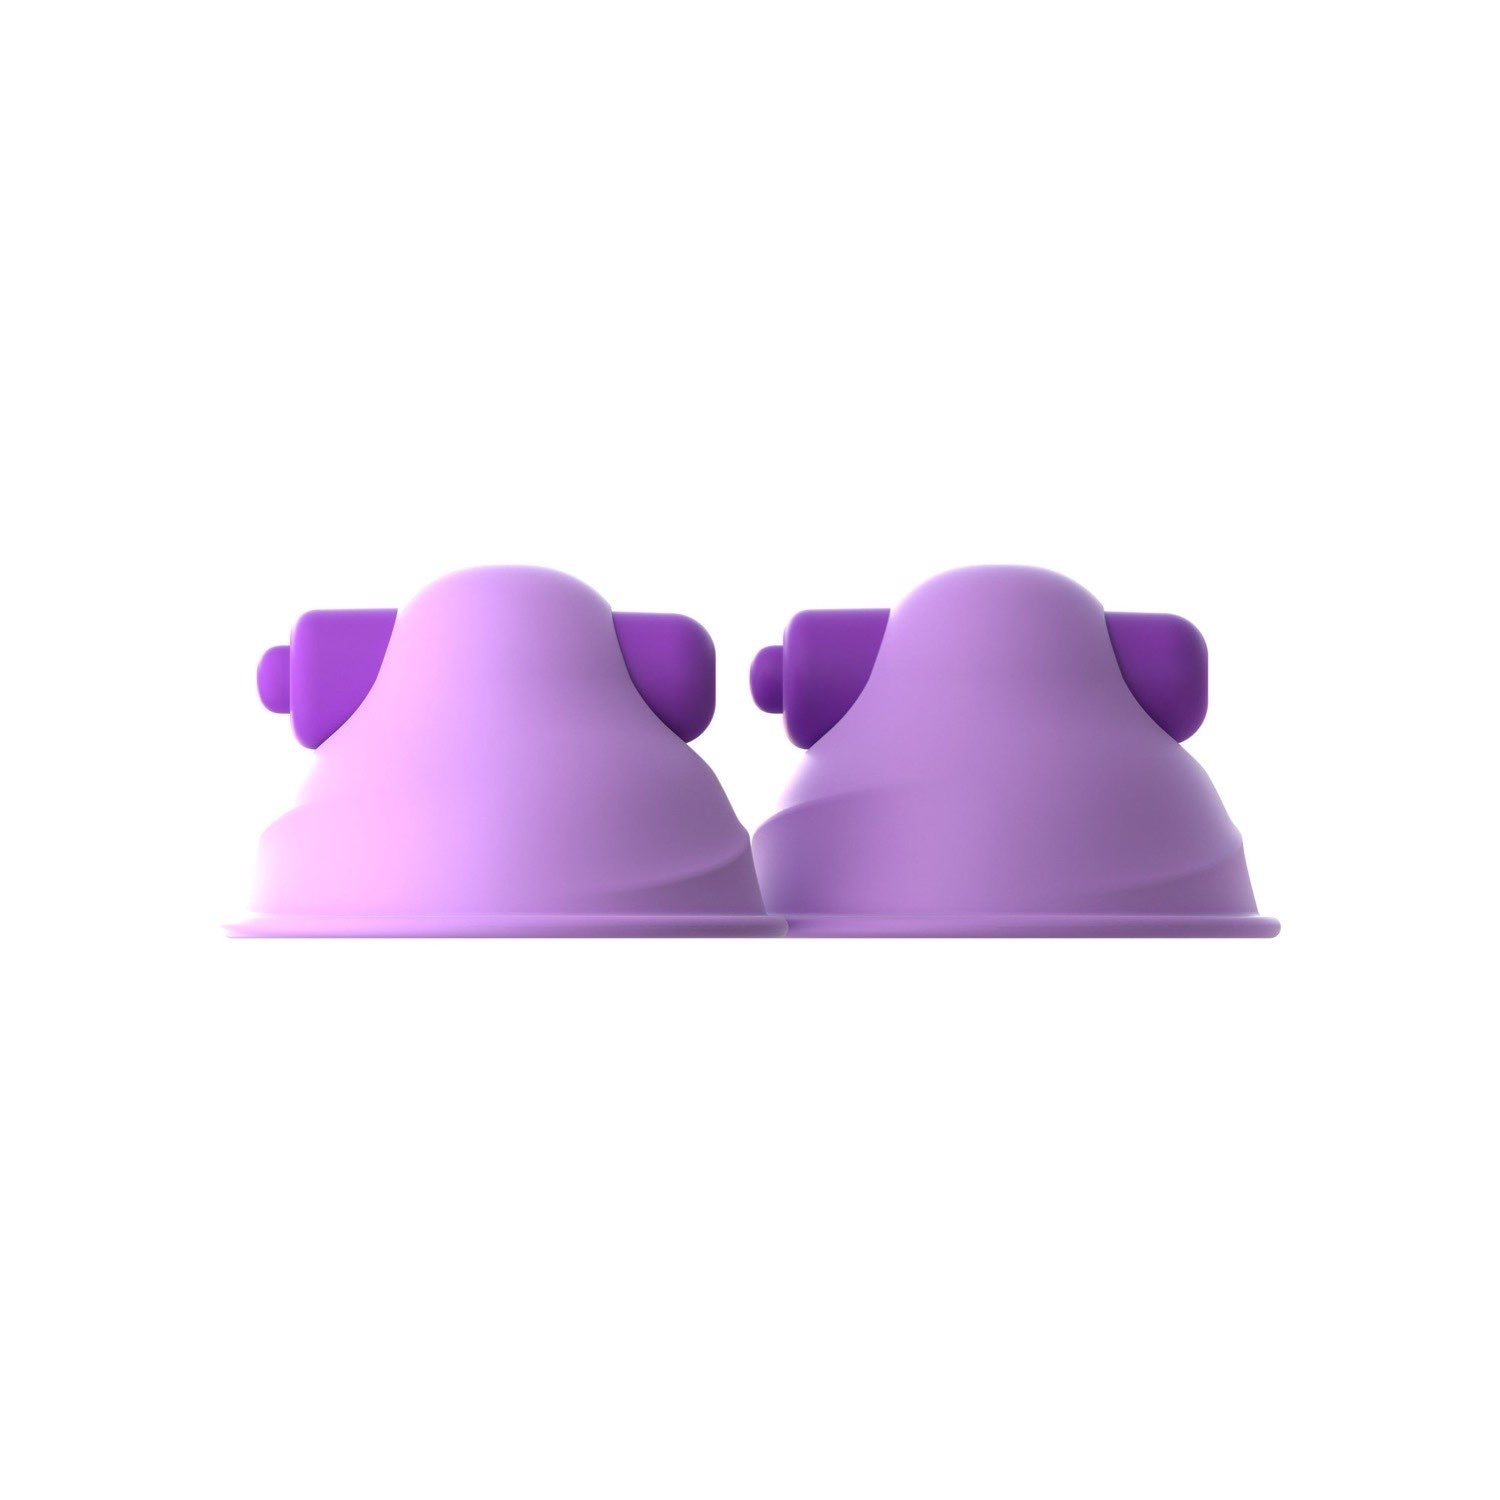 Fantasy For Her Vibrating Nipple Suck-Hers - Purple 5 cm Vibrating Nipple Suckers - Set of 2 by Pipedream